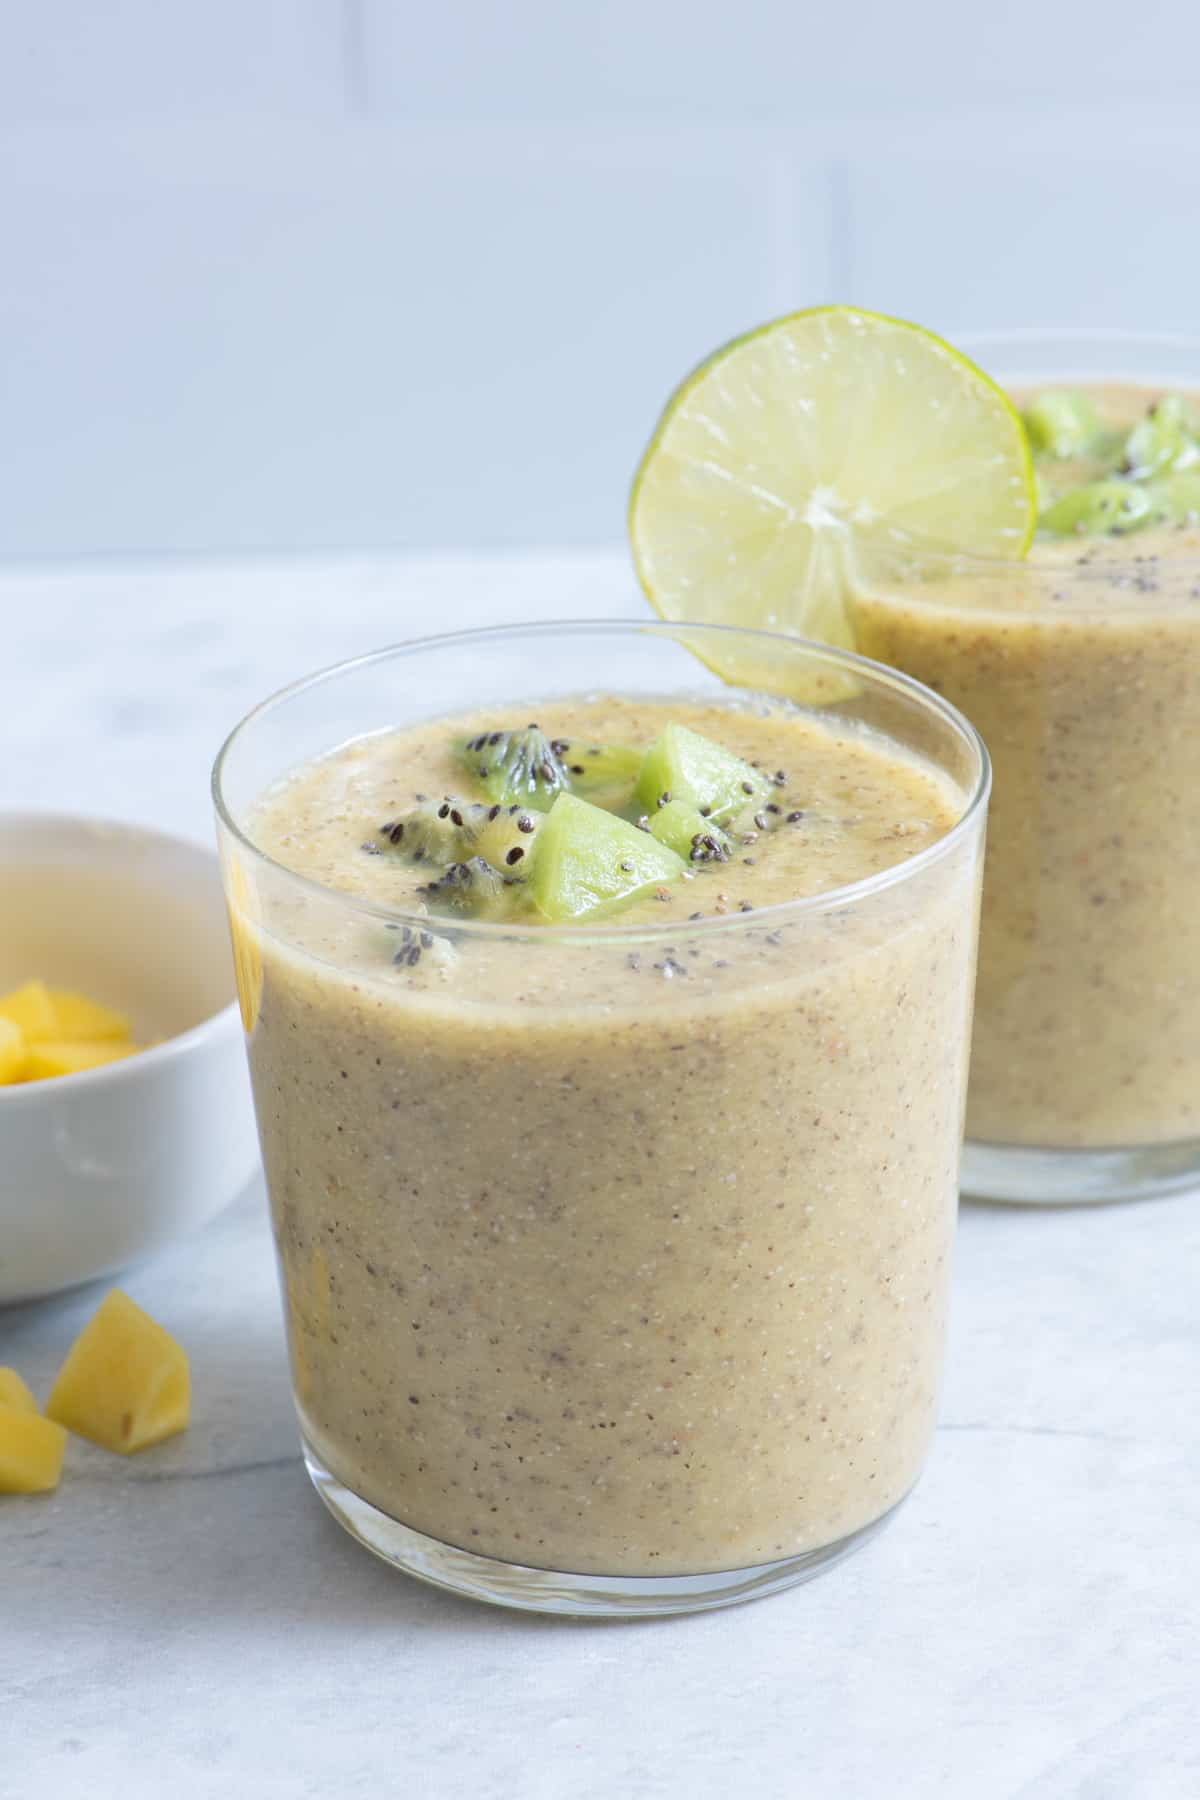 The sweet sunshine smoothie is made purely with fresh fruits including mango, banana, kiwi, oranges and freshly squeezed orange juice. It's loaded with Vitamin C to give you a boost of energy to kick off the day or re-energize in the middle of the day. It's in low in fat, vegan and super easy to whip up!